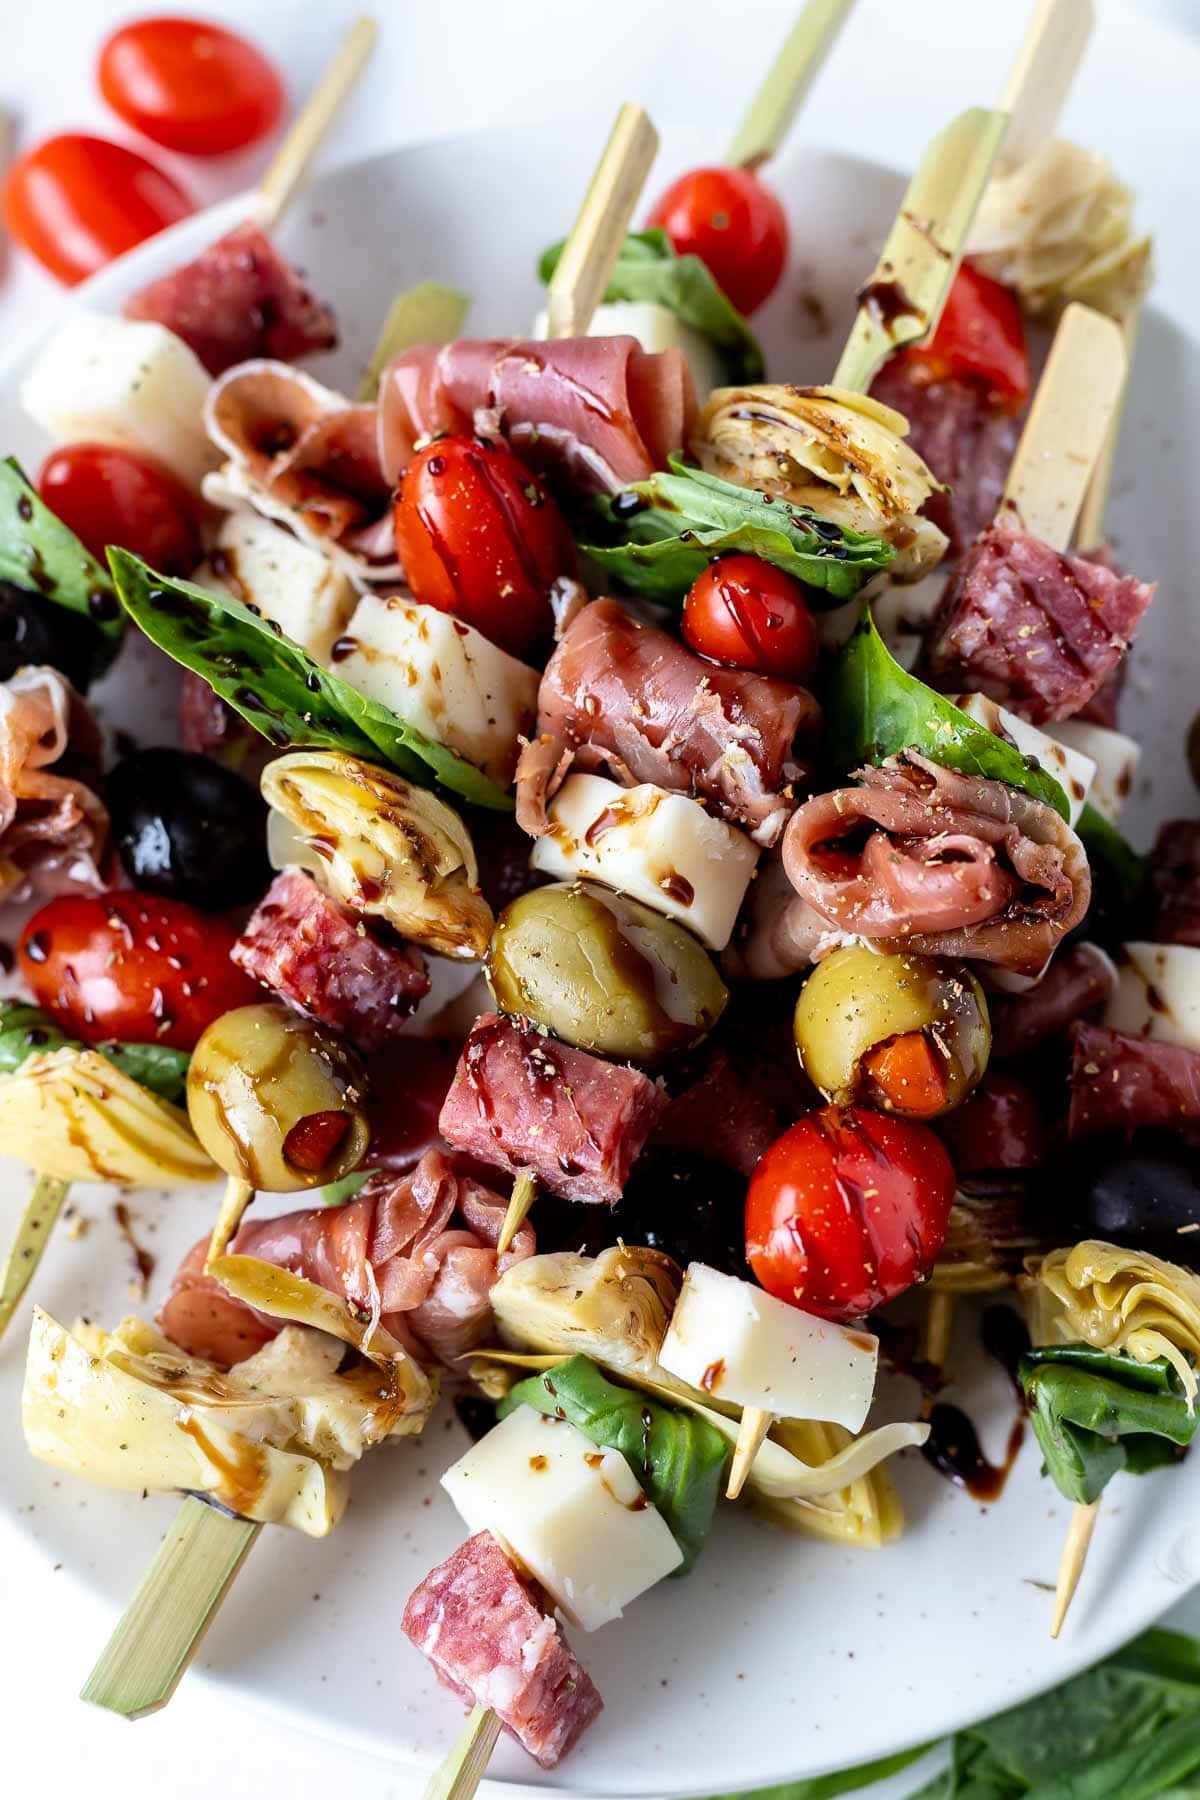 Antipasto skewers with grape tomatoes, olives, fresh basil, mozzarella, small cuts of deli meat. 